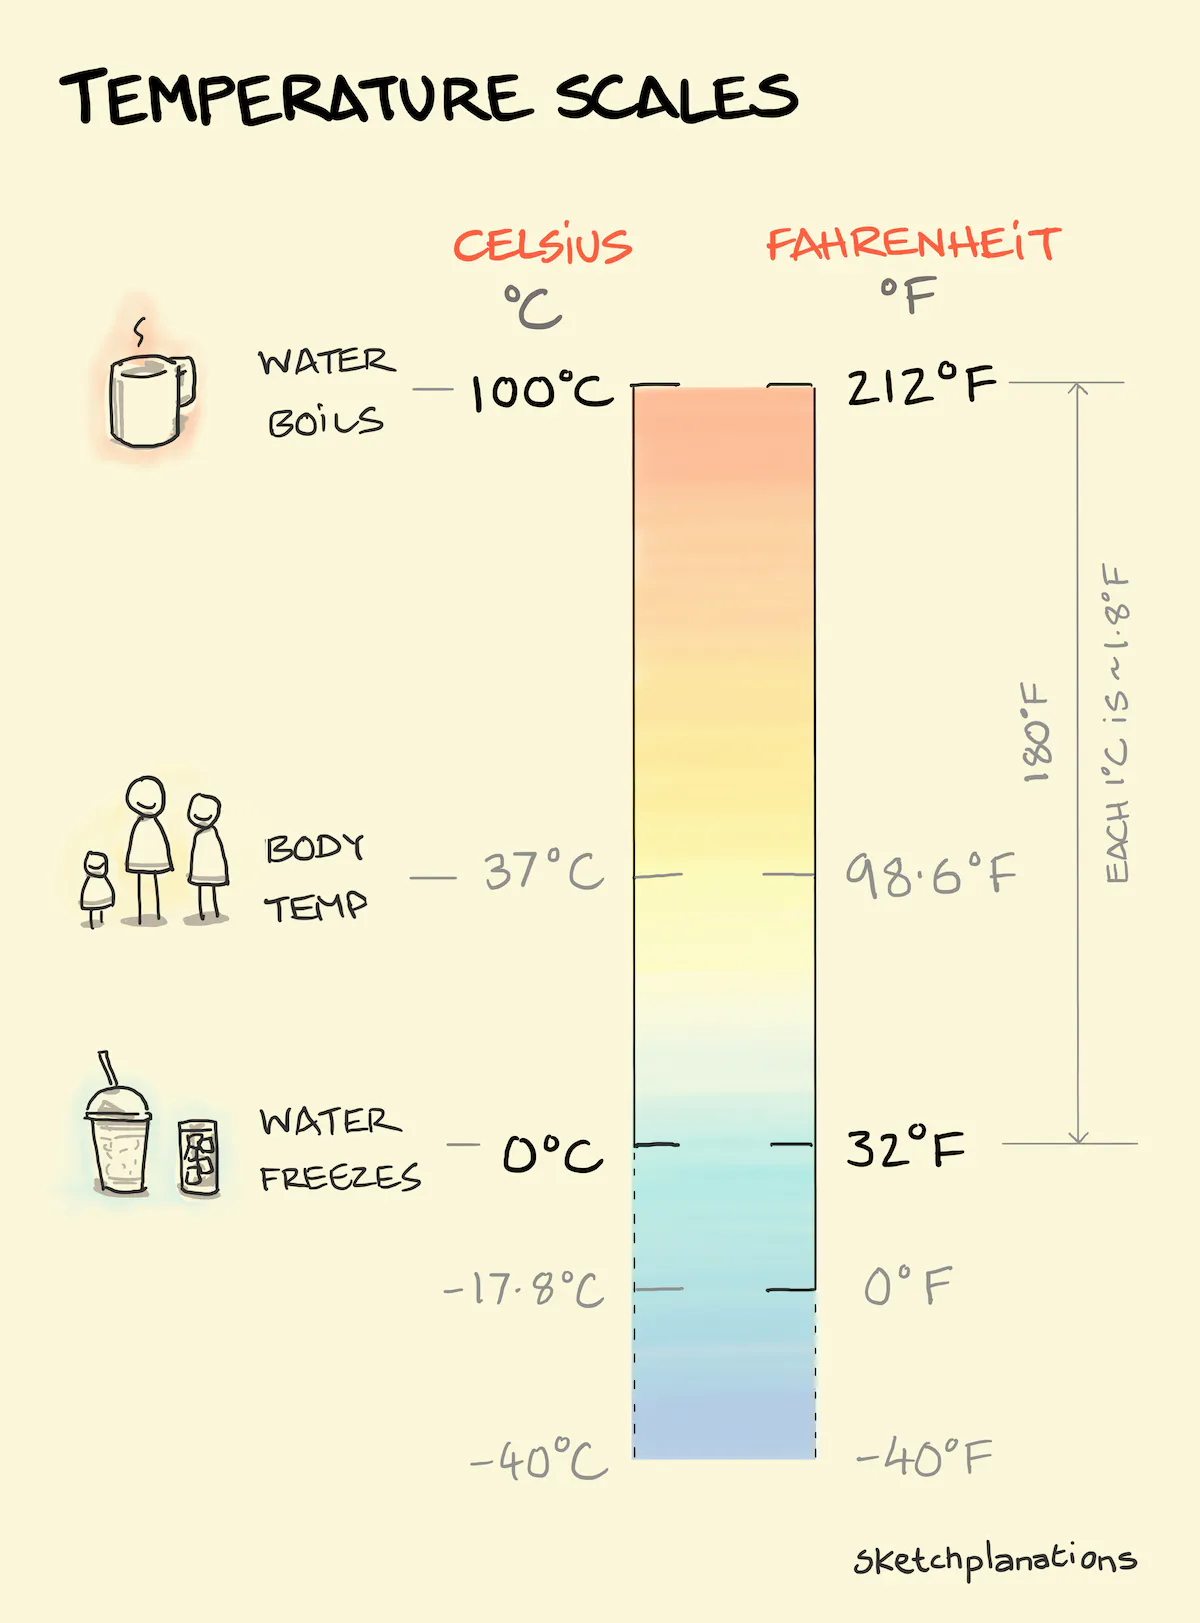 Boiling and freezing points in Celsius and Fahrenheit scales